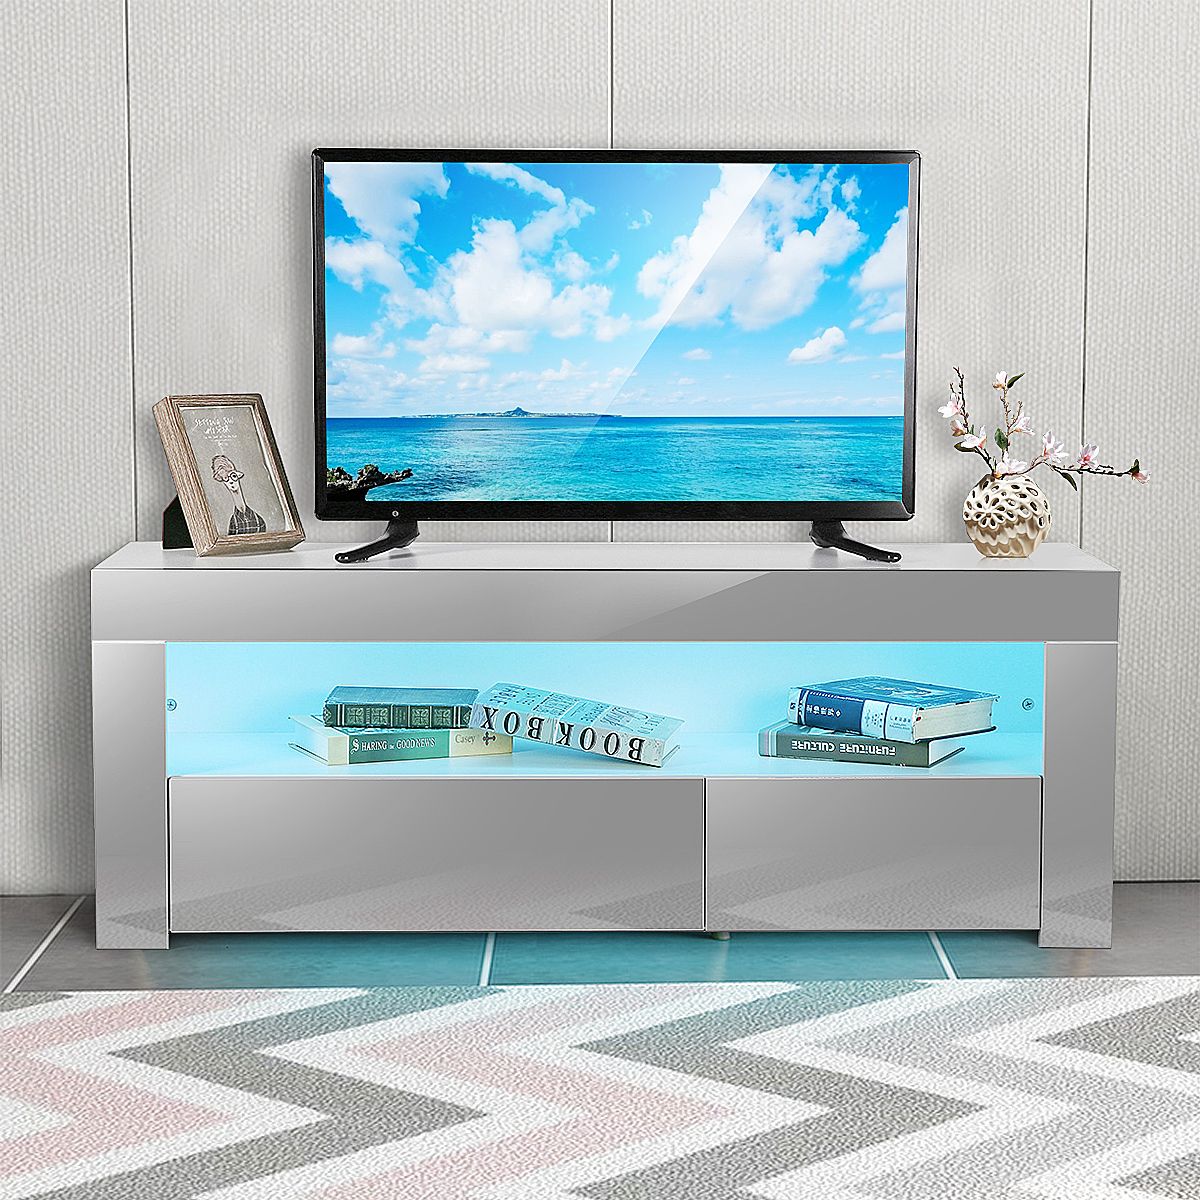 47" Tv Stand High Gloss Tv Cabinet, With 16 Color Leds, 2 Regarding Twila Tv Stands For Tvs Up To 55" (View 15 of 15)